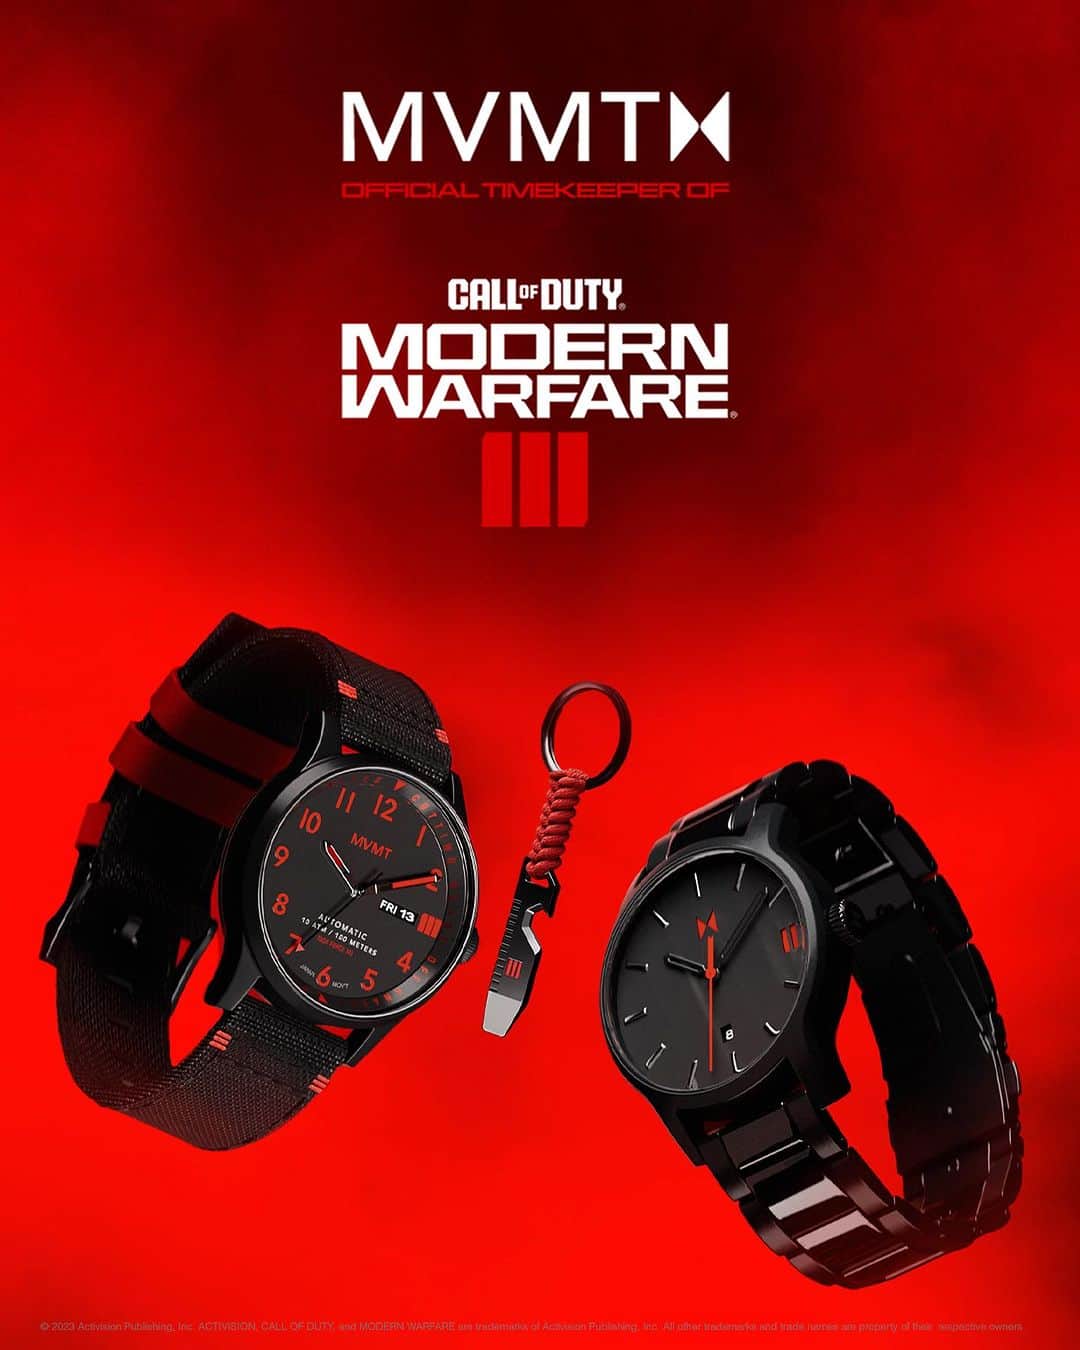 MVMTのインスタグラム：「JUST DROPPED. The Official Timekeeper of @callofduty: Modern Warfare III is proud to bring you this limited edition watch collaboration, inspired by the game's iconic good vs. evil rivalry. Meet The Price, inspired by the game's rugged and intrepid protagonist Captain John Price, and The Makarov, inspired by the game's cold and calculated villain Vladimir Makarov. Only 500 made of each.」